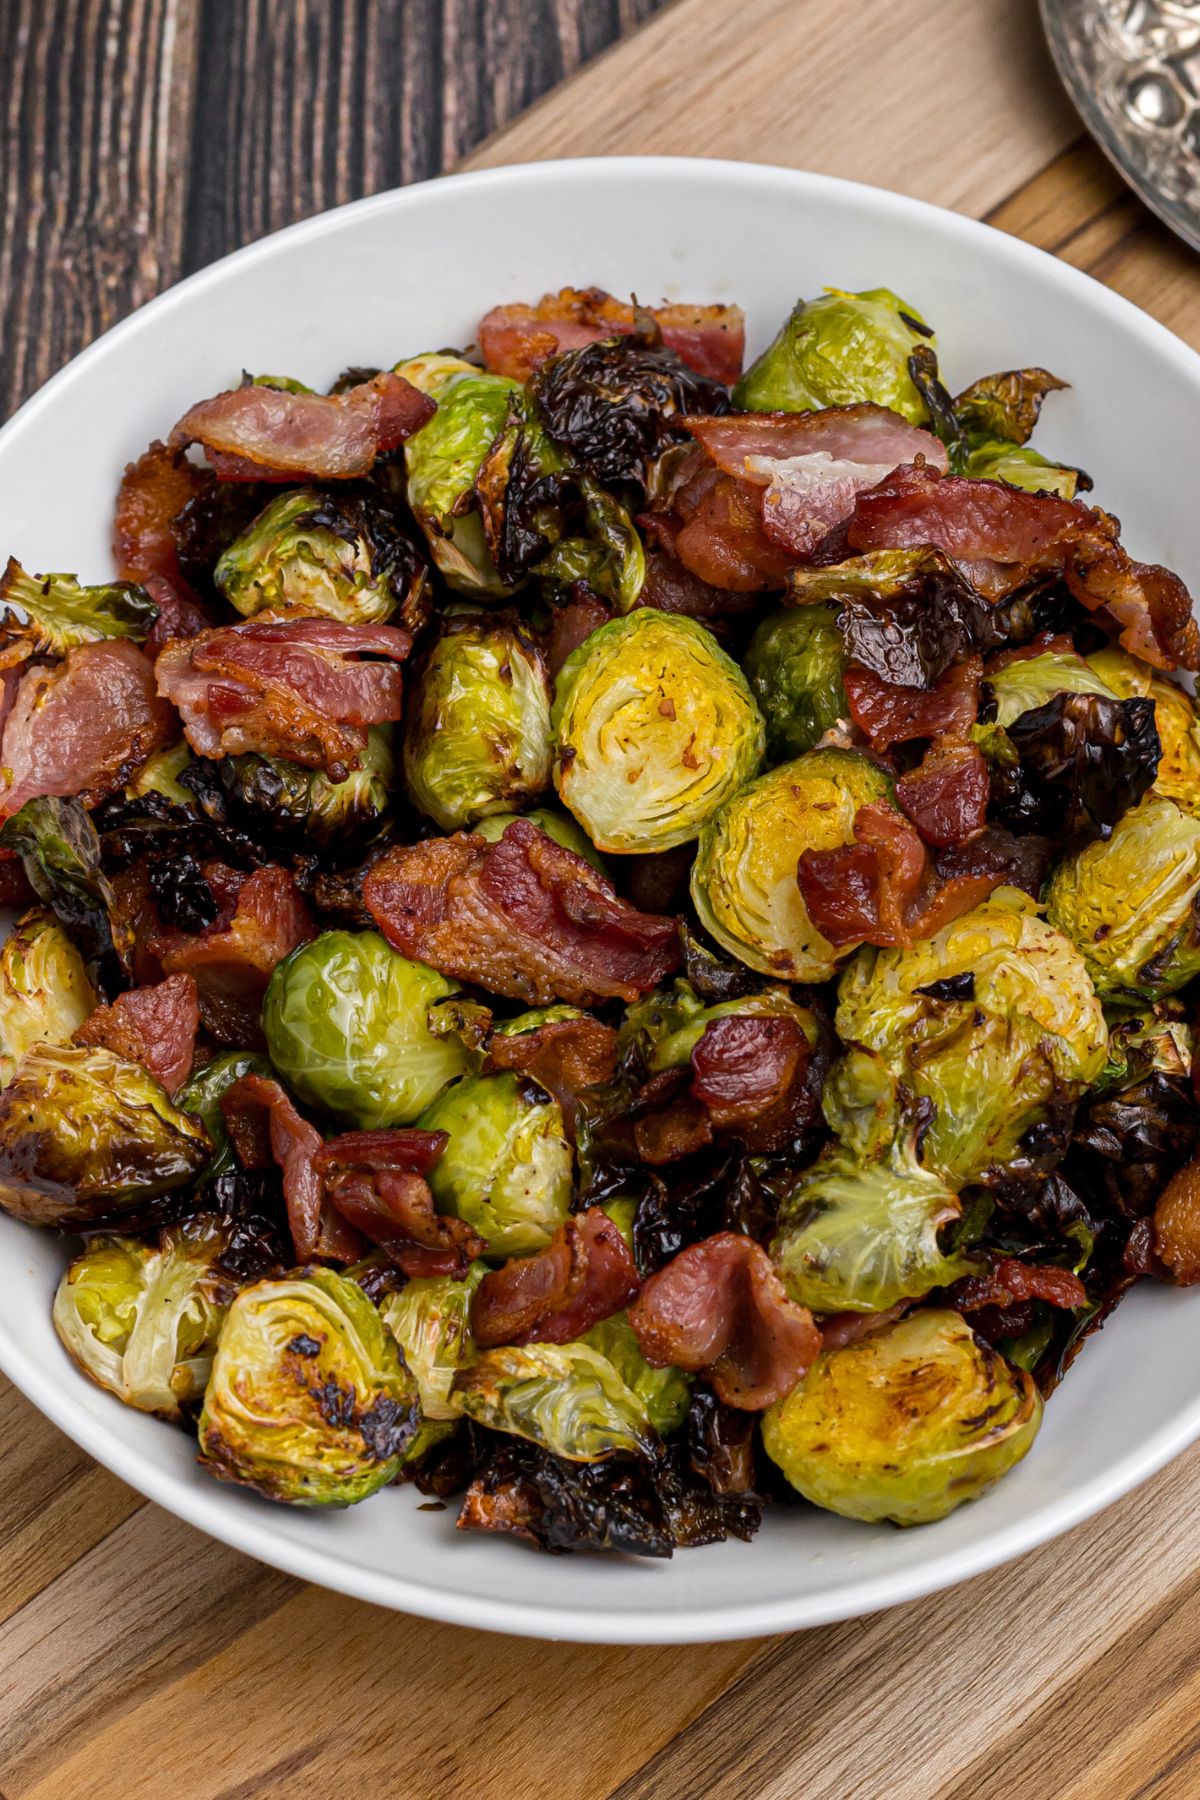 Plate of air fried brussels sprouts and bacon.